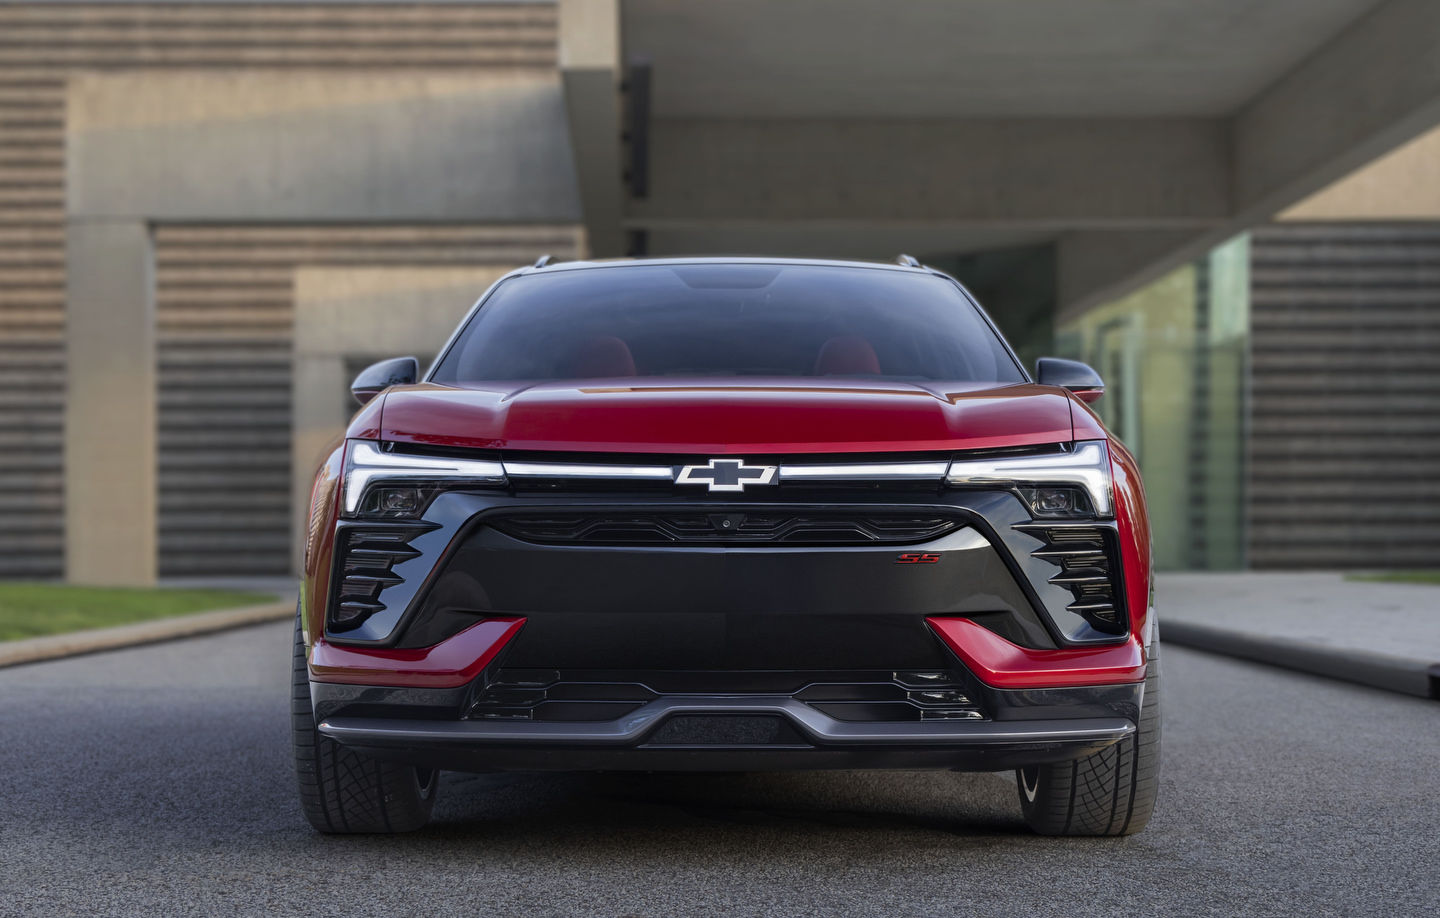 2024 Chevrolet Blazer EV: what we can expect from the all-electric SUV